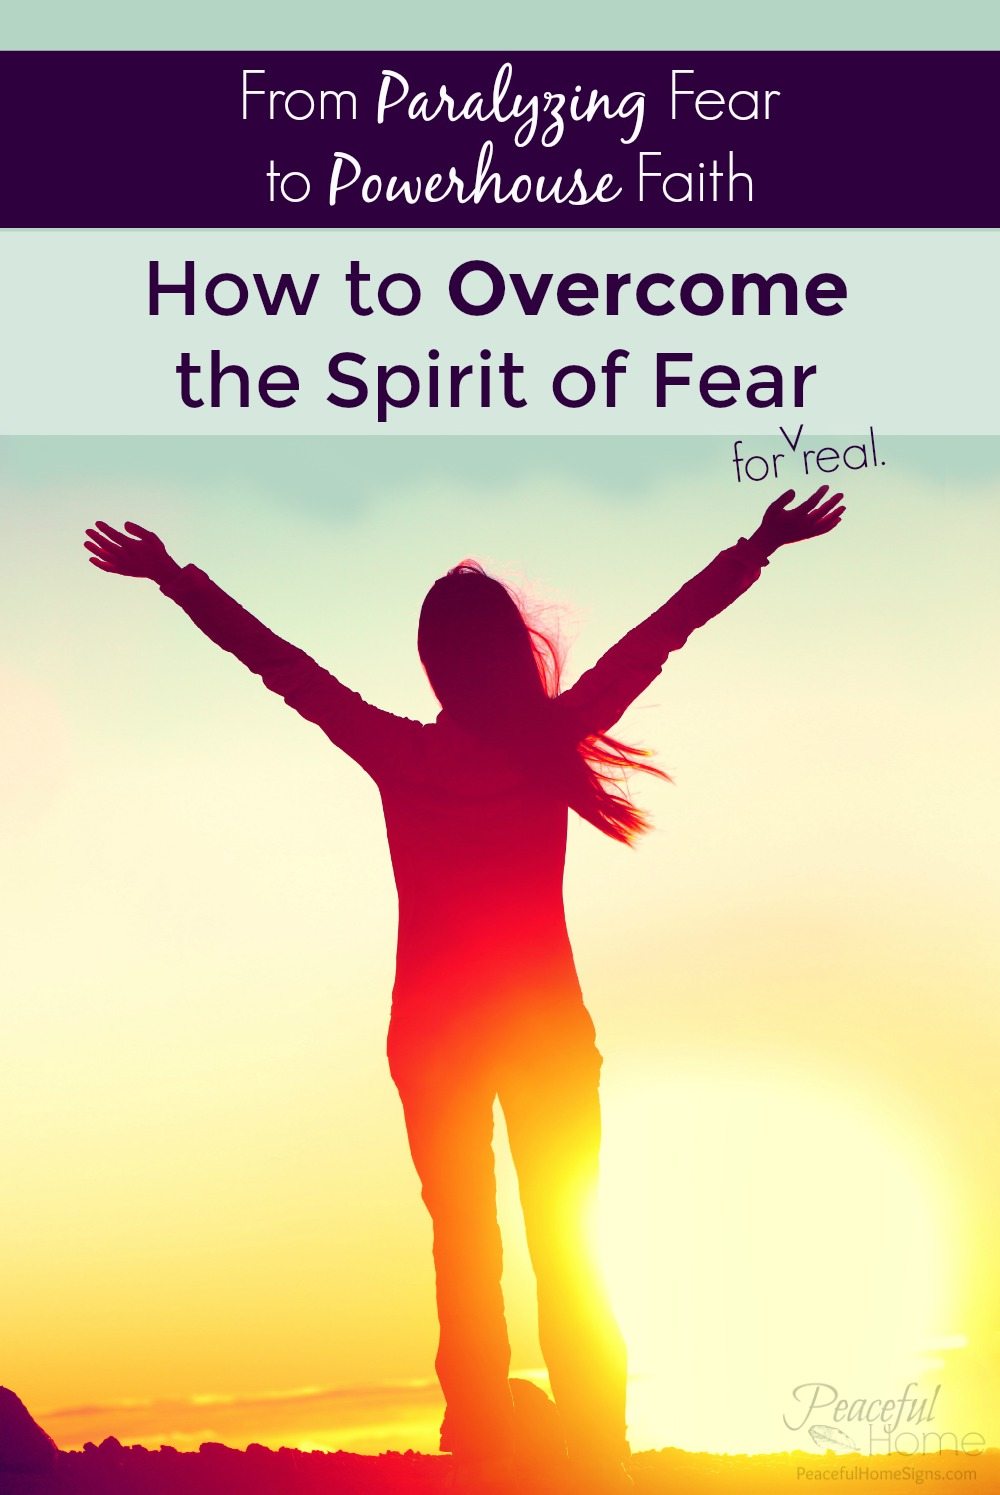 how to overcome the spirit of fear, overcoming fear, the Biblical way to overcome fear, stop being afraid, freedom from fear, rebuke the spirit of fear